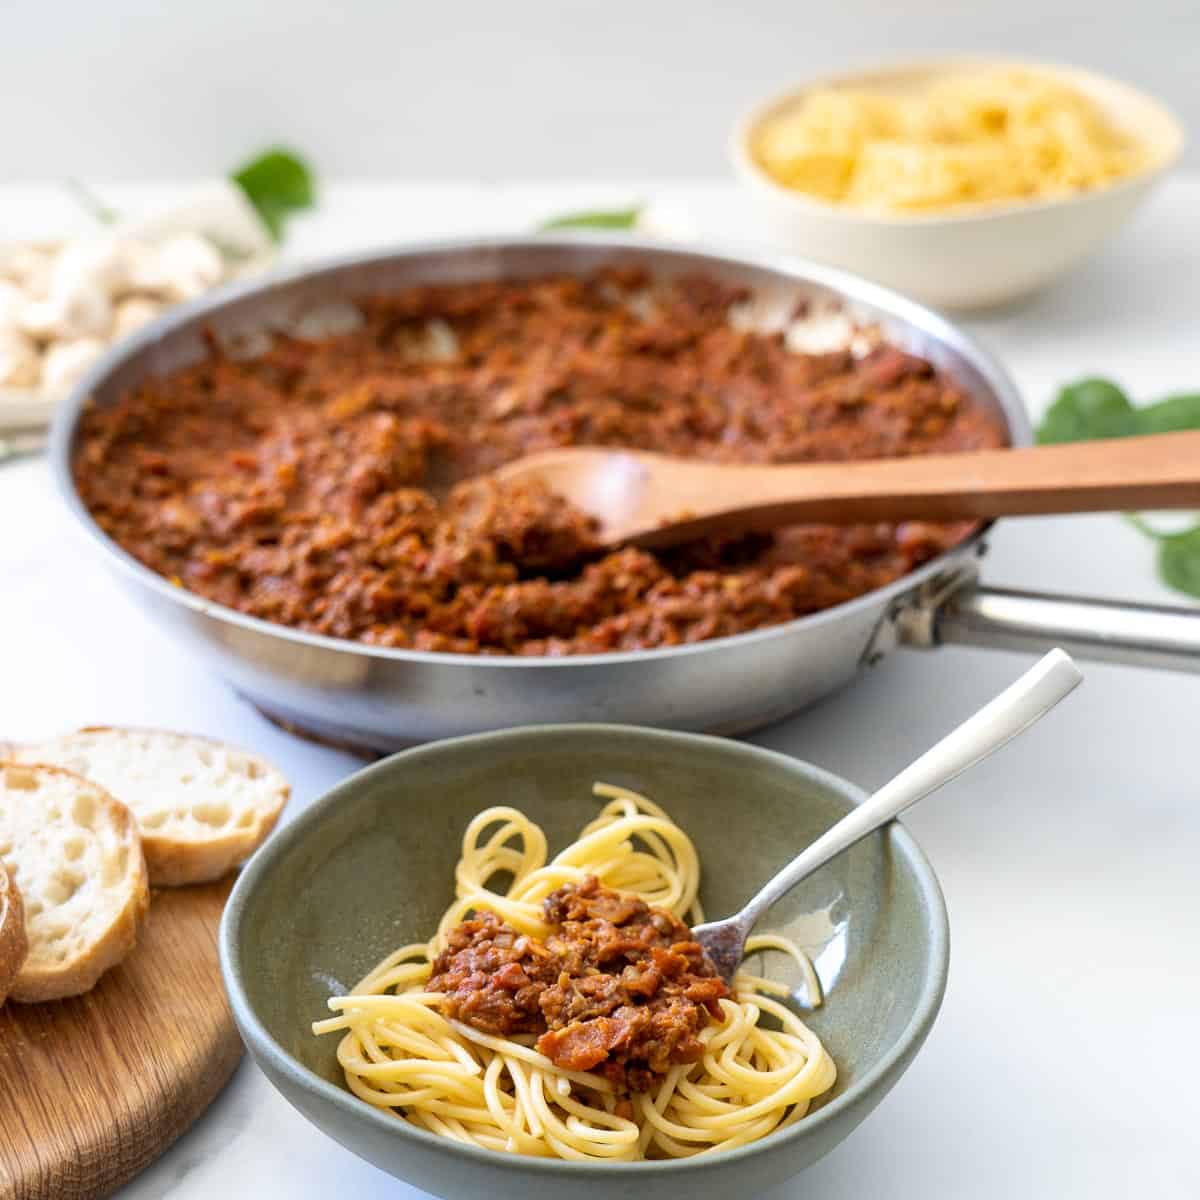 A bolw of spaghetti bolognese sitting on a table next to a large fry pan of bolognese sauce, 